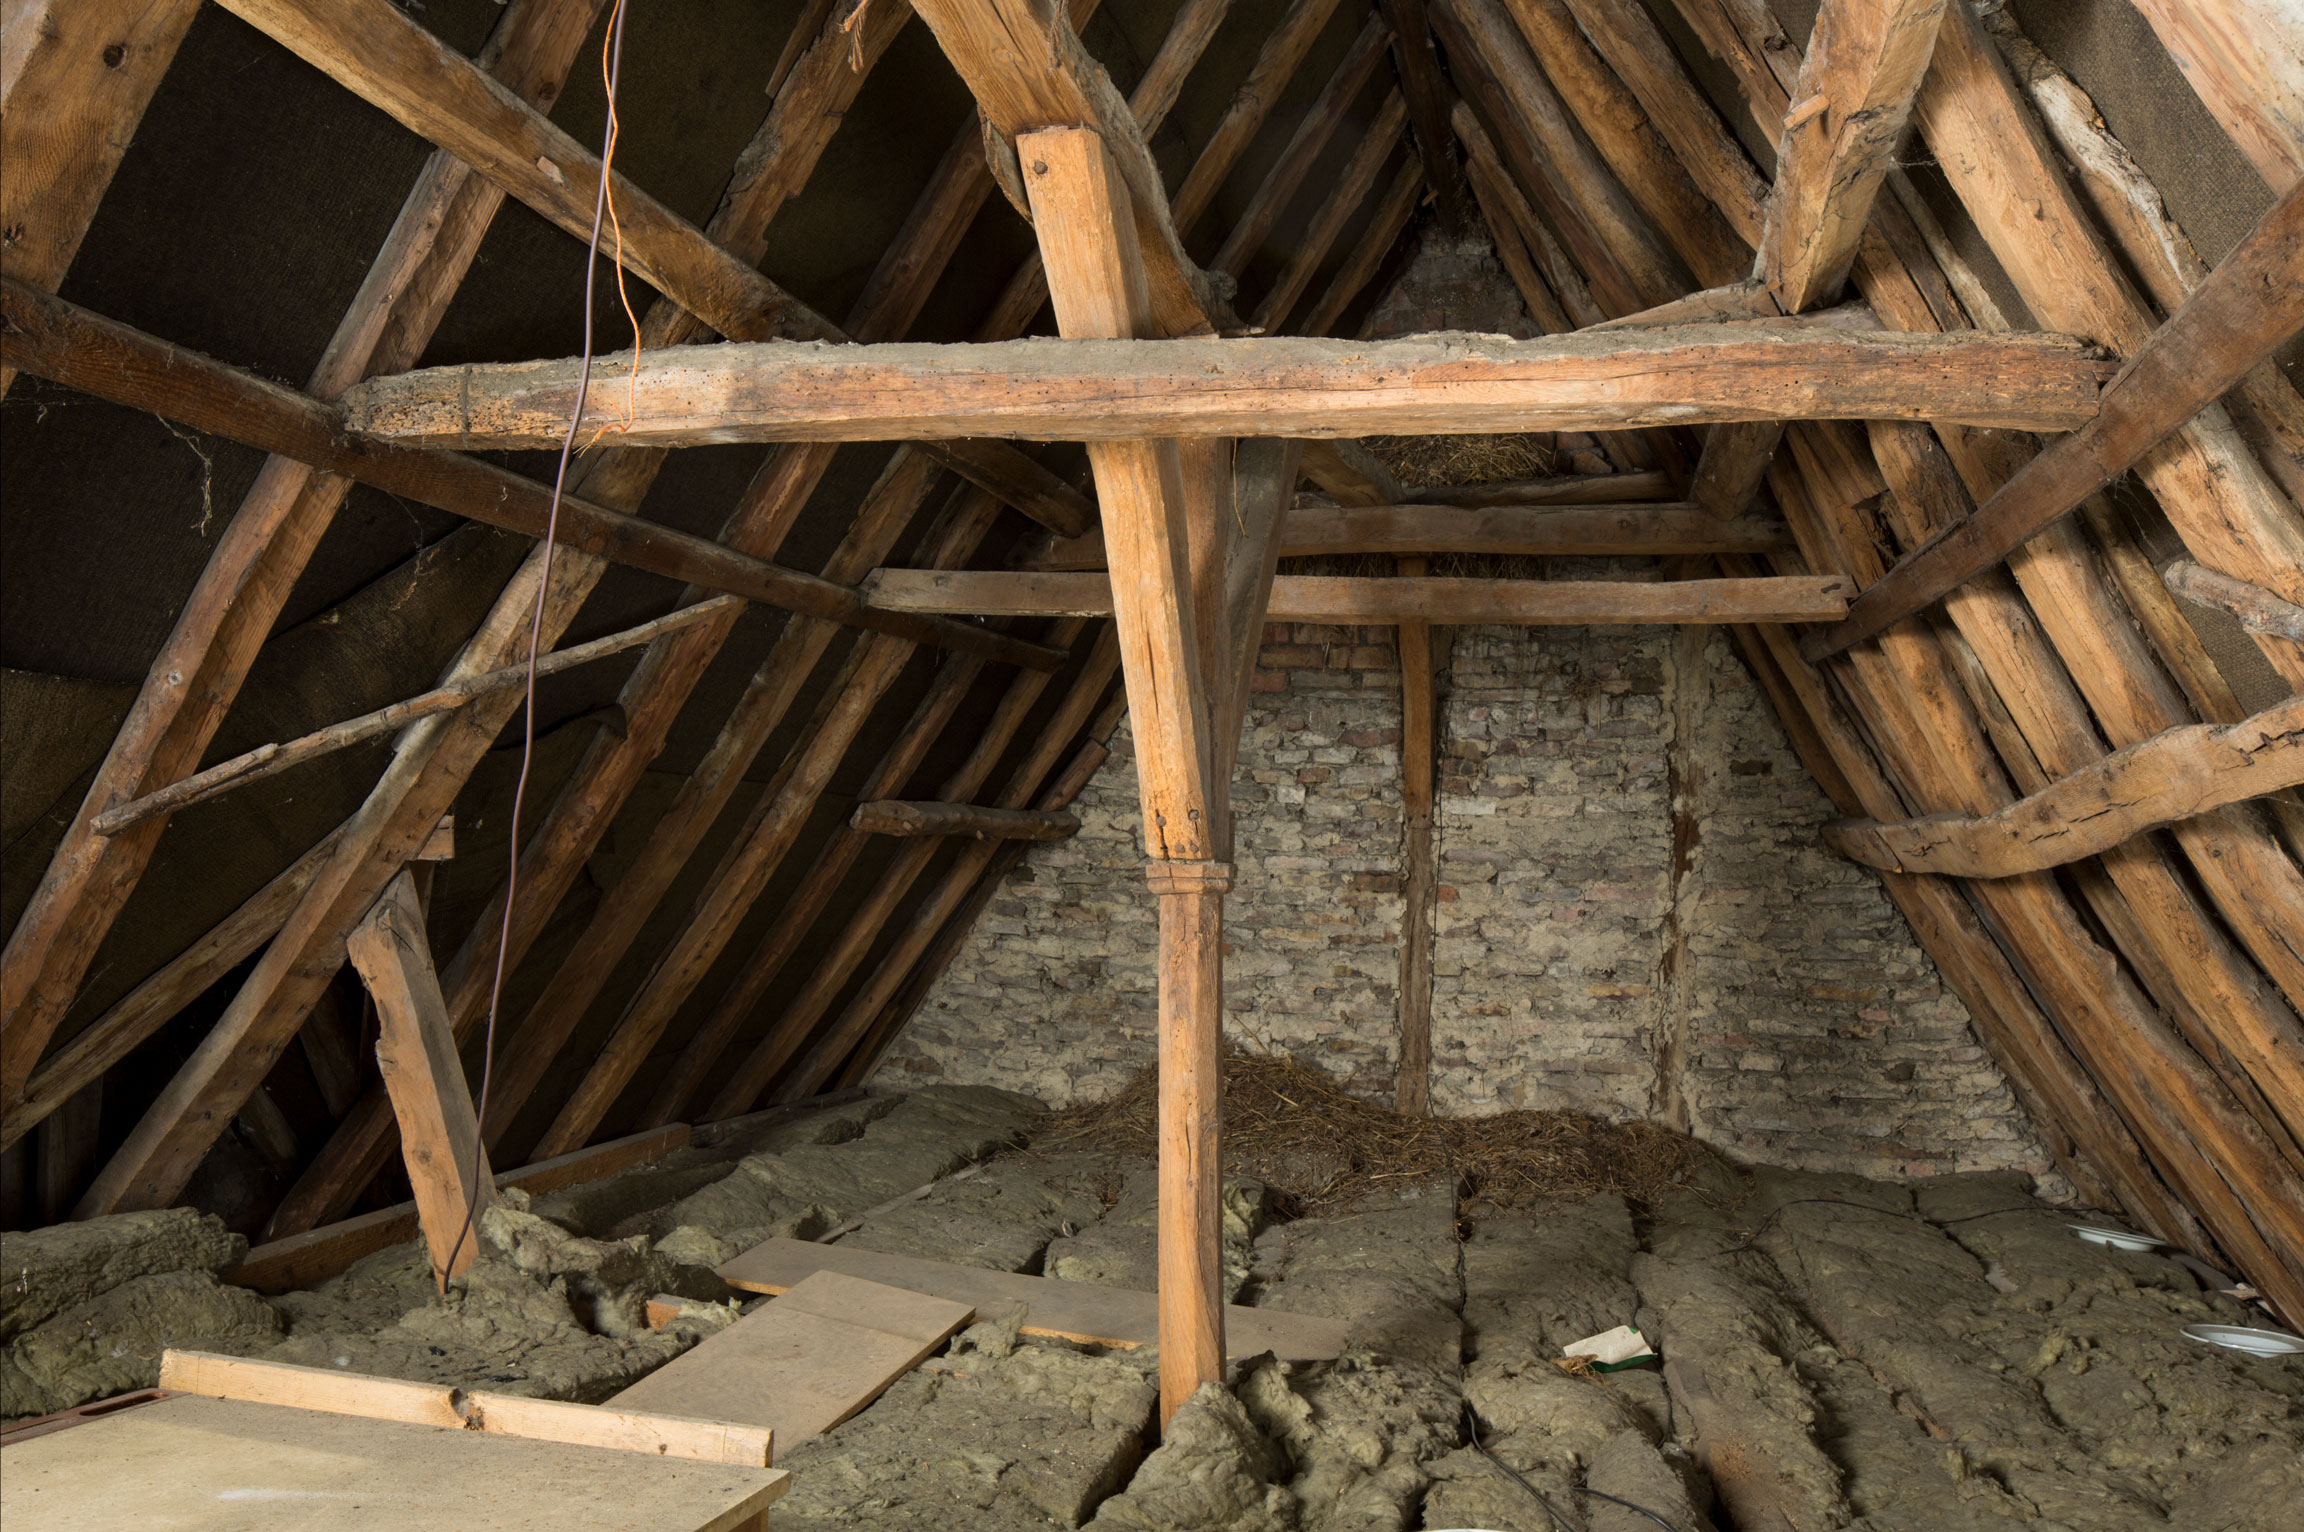 Interior view of roof timbers in an attic.